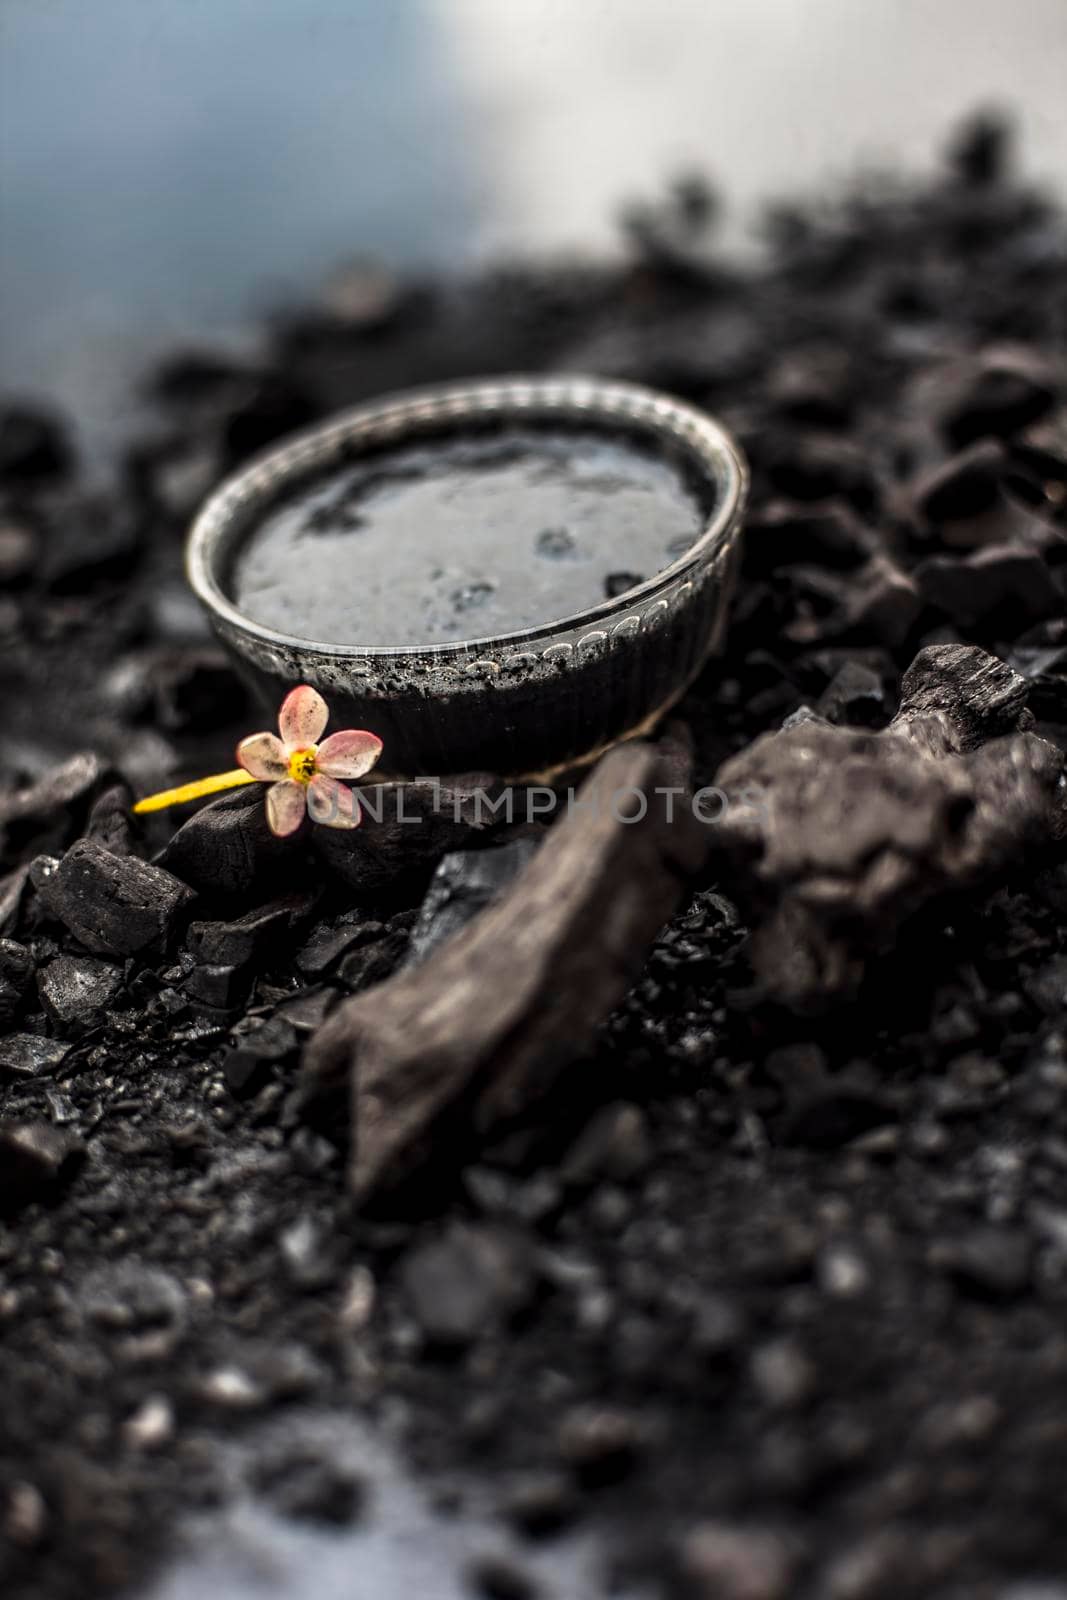 Close up of activated charcoal in a glass bowl on the wooden surface along with some raw powder of charcoal or coal spread on the surface. by mirzamlk